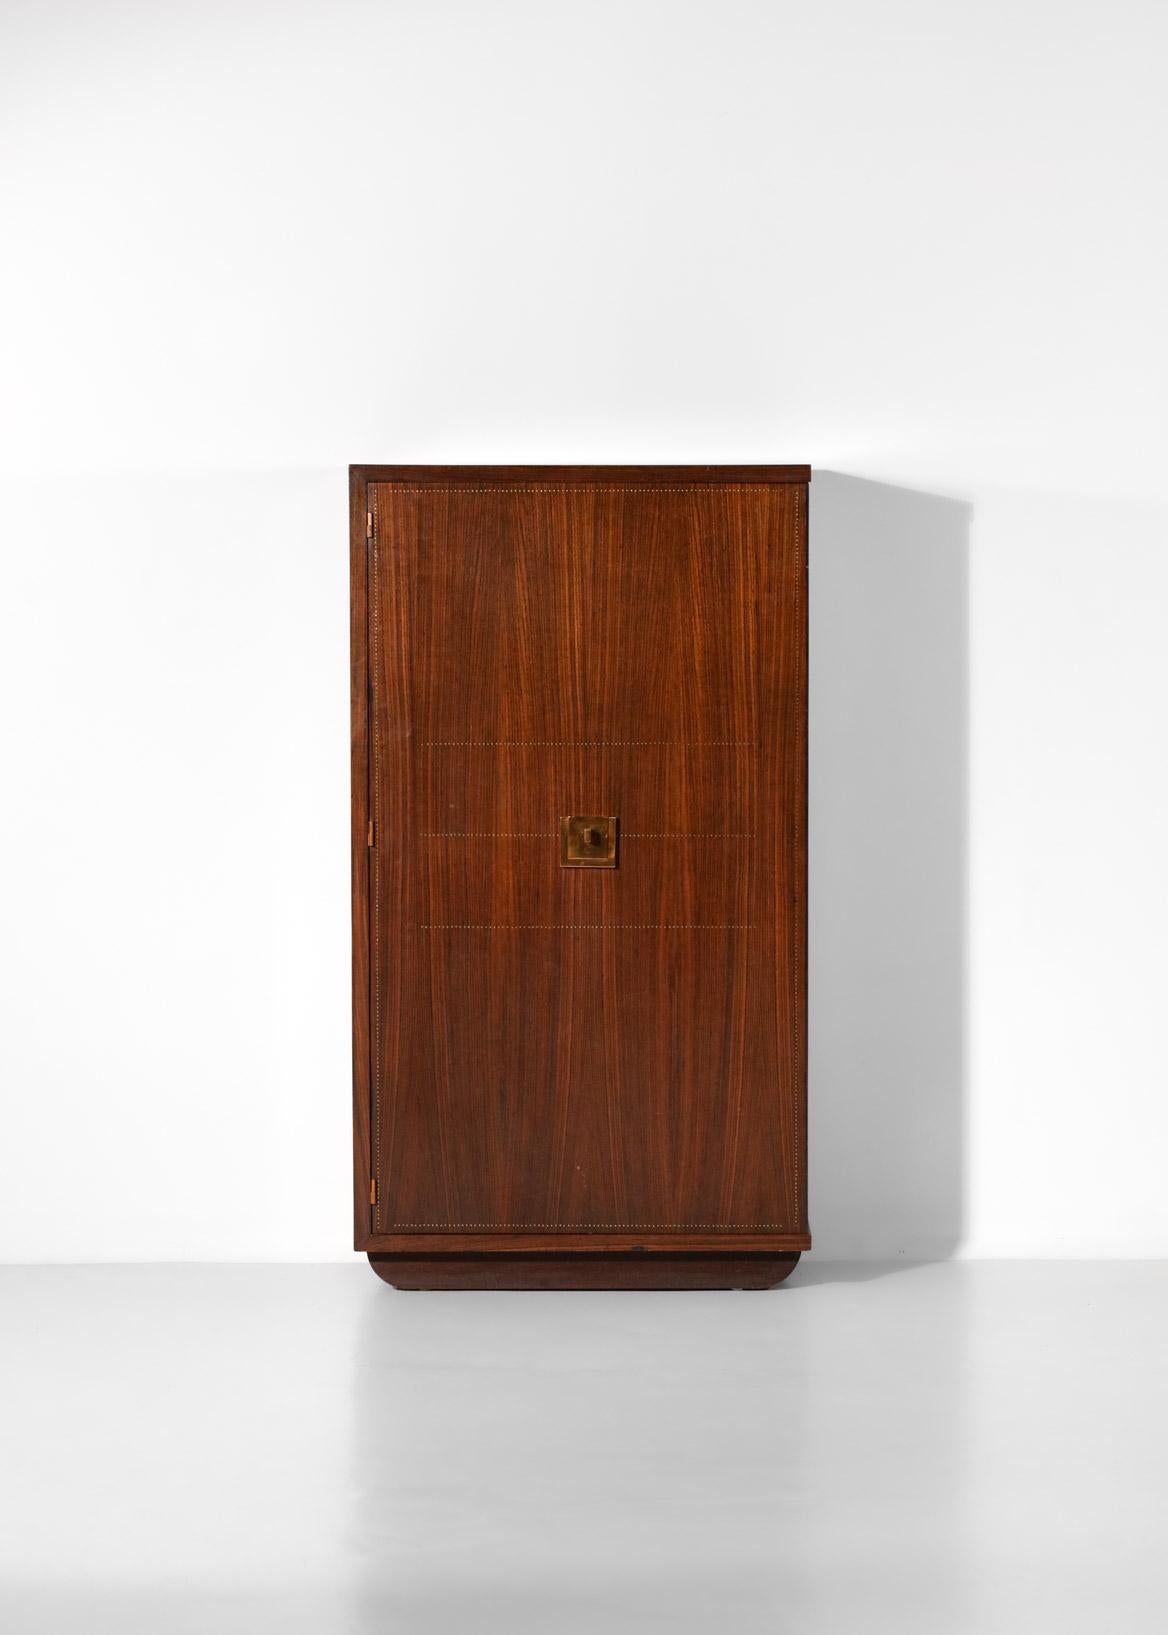 1940s cabinet by French designer André Sornay. The structure is made of solid mahogany and veneered wood, highlighted by a system of brass nails perfectly aligned around the edges of the furniture (see photos). The large door opens onto a series of